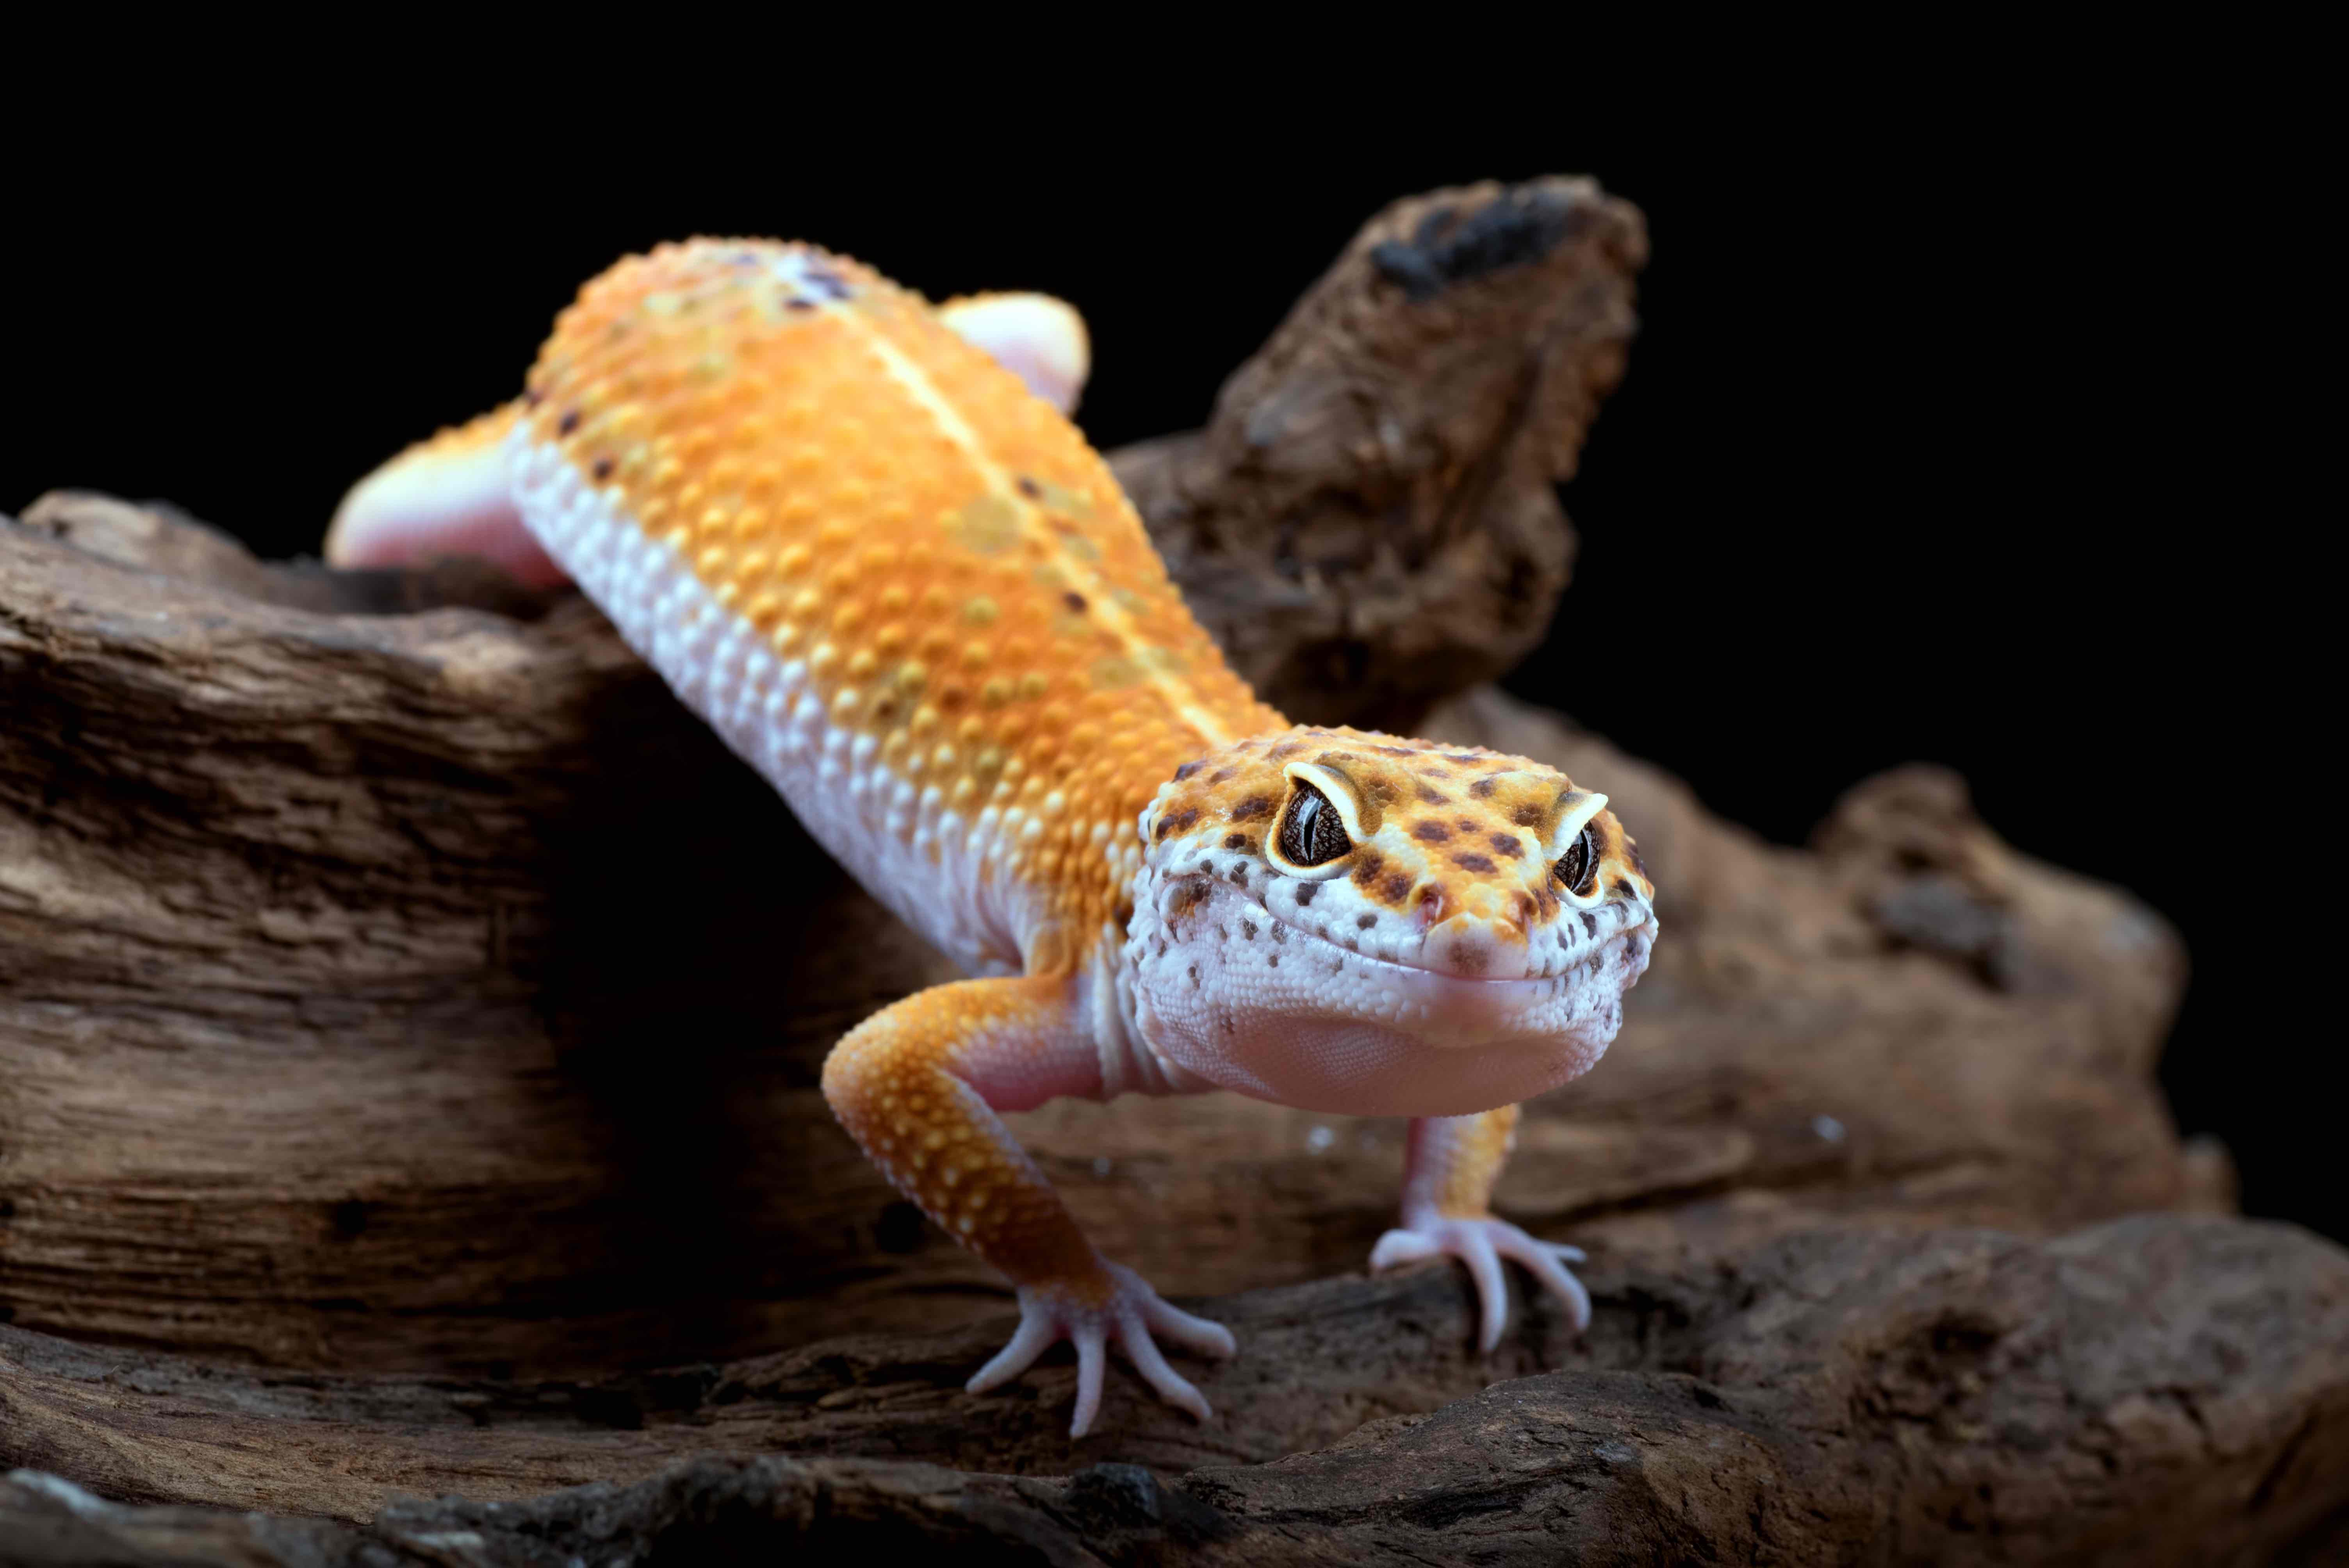 40 Leopard Gecko That Are Cuter Than You Expect 